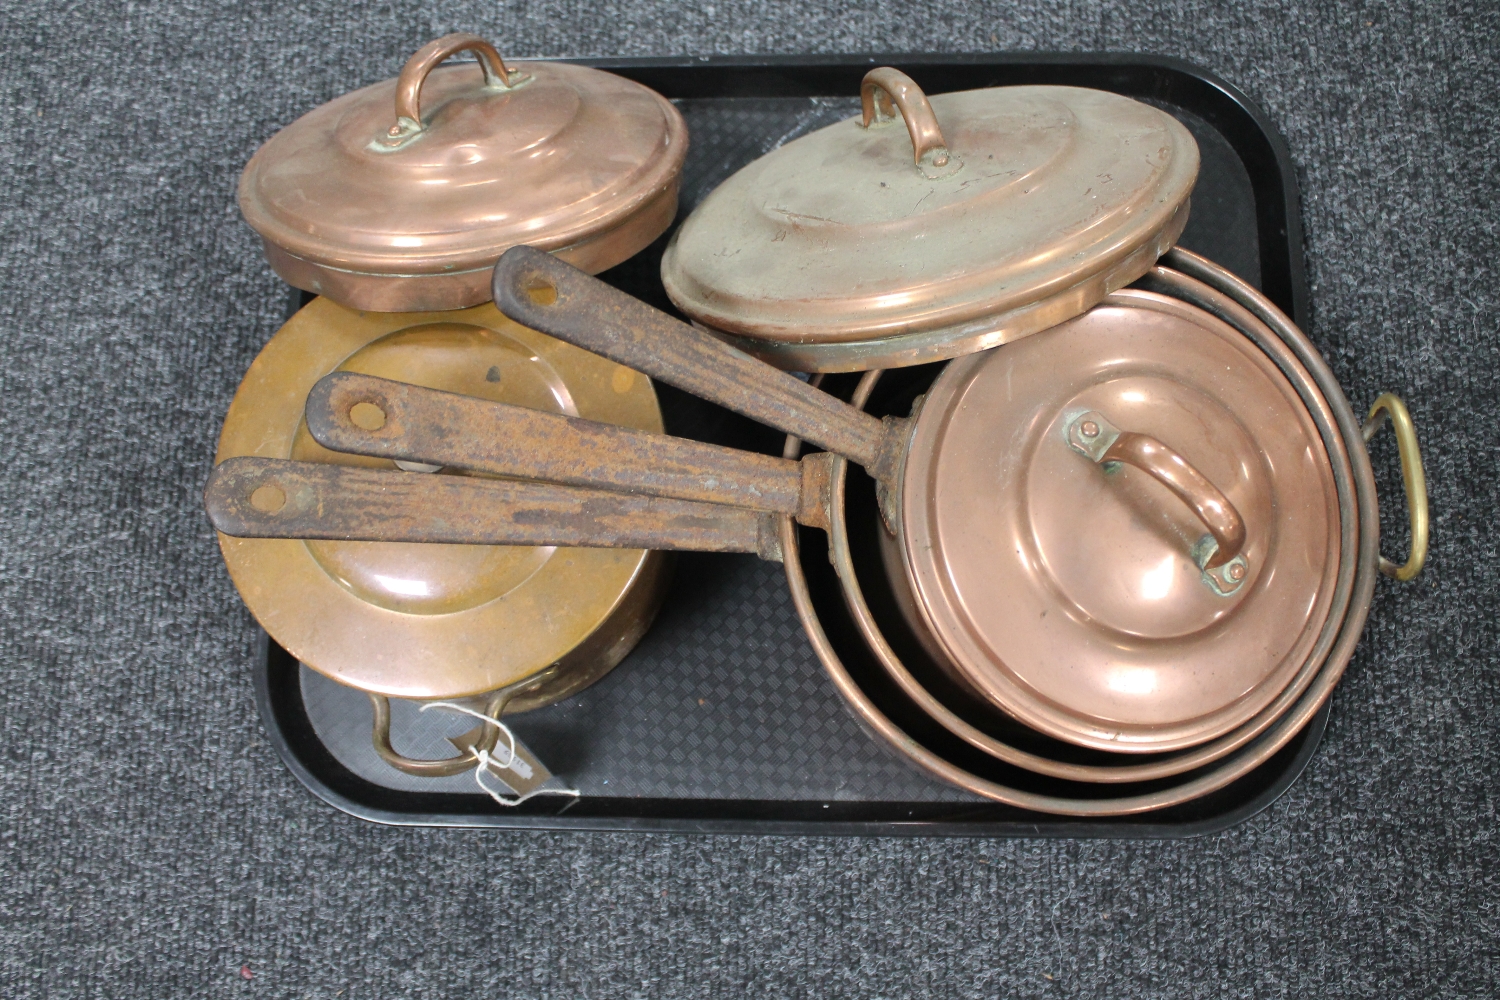 A tray of three antique copper cast iron handled pans with lids and an antique cooking pot